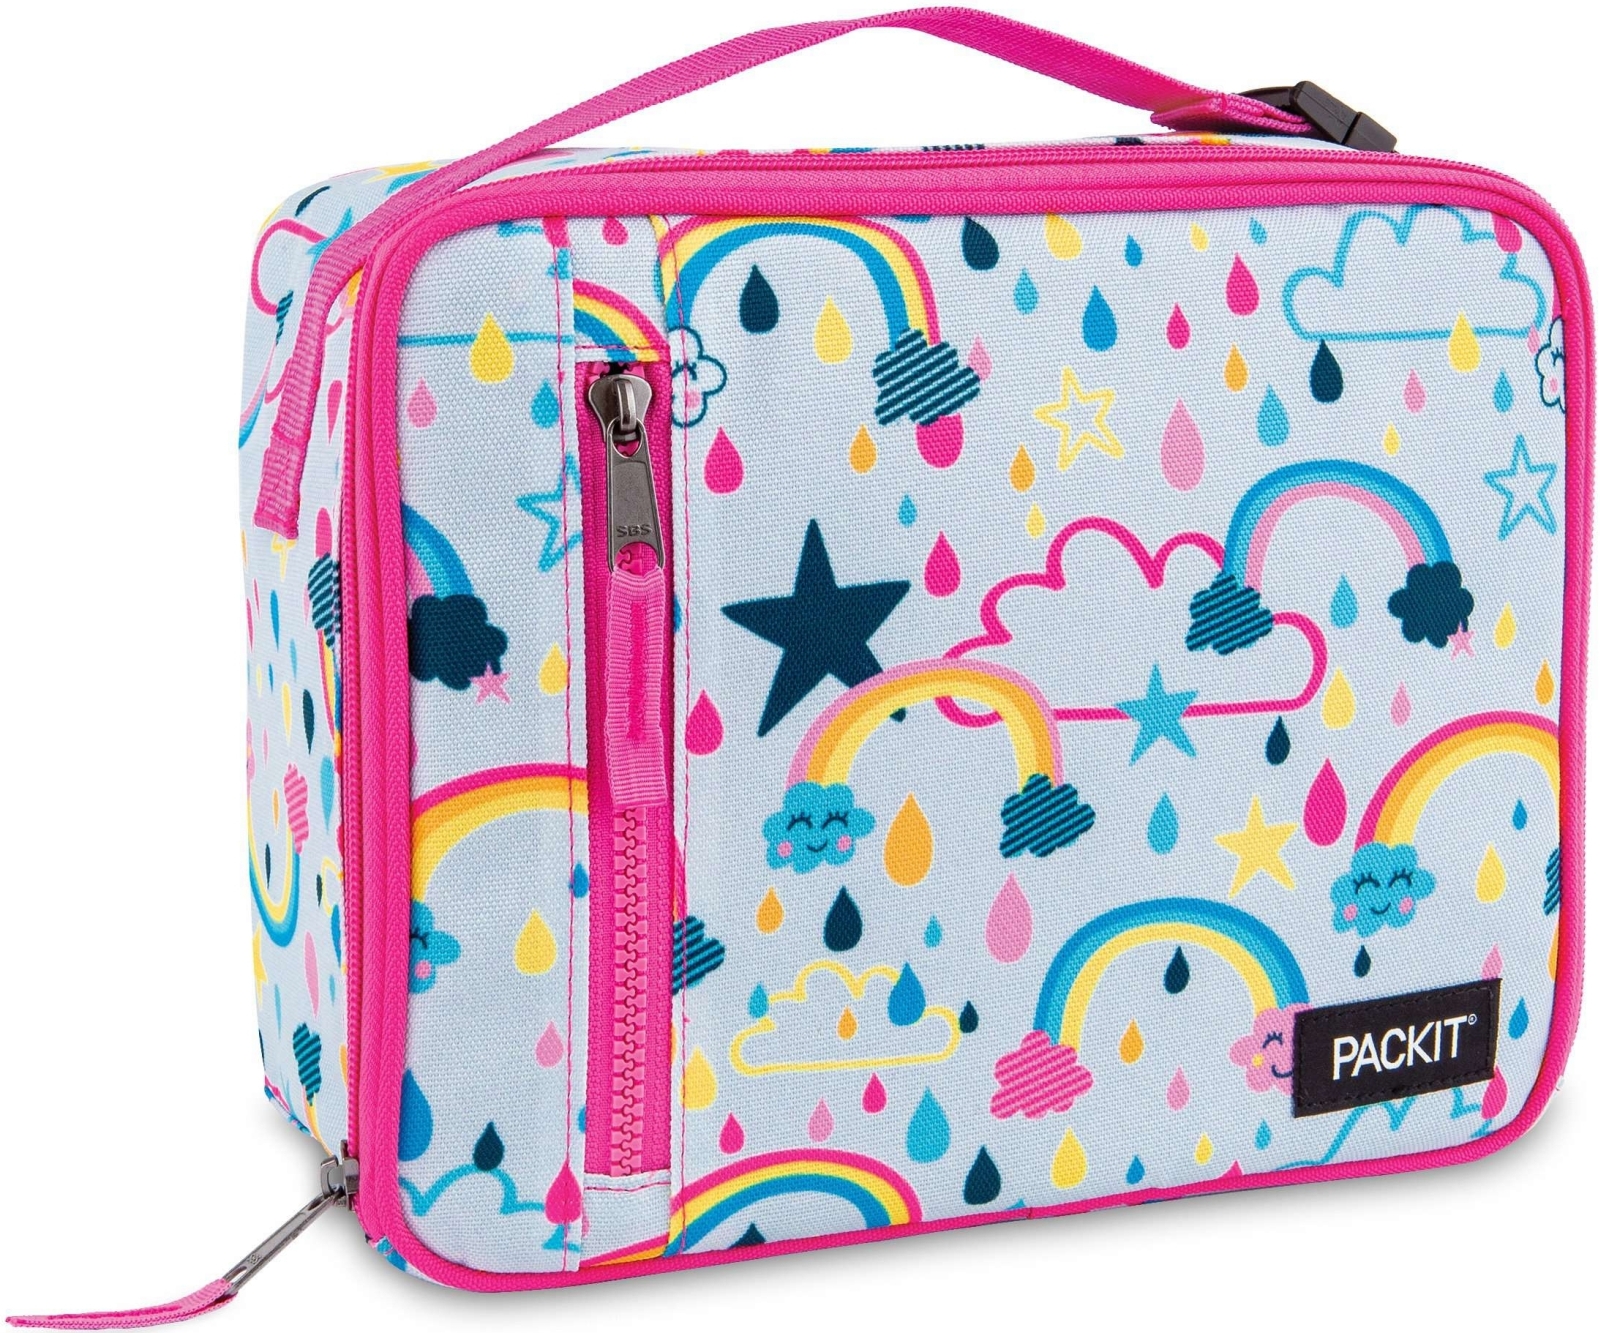 Packit Classic Lunch Box - Rainbow Sky